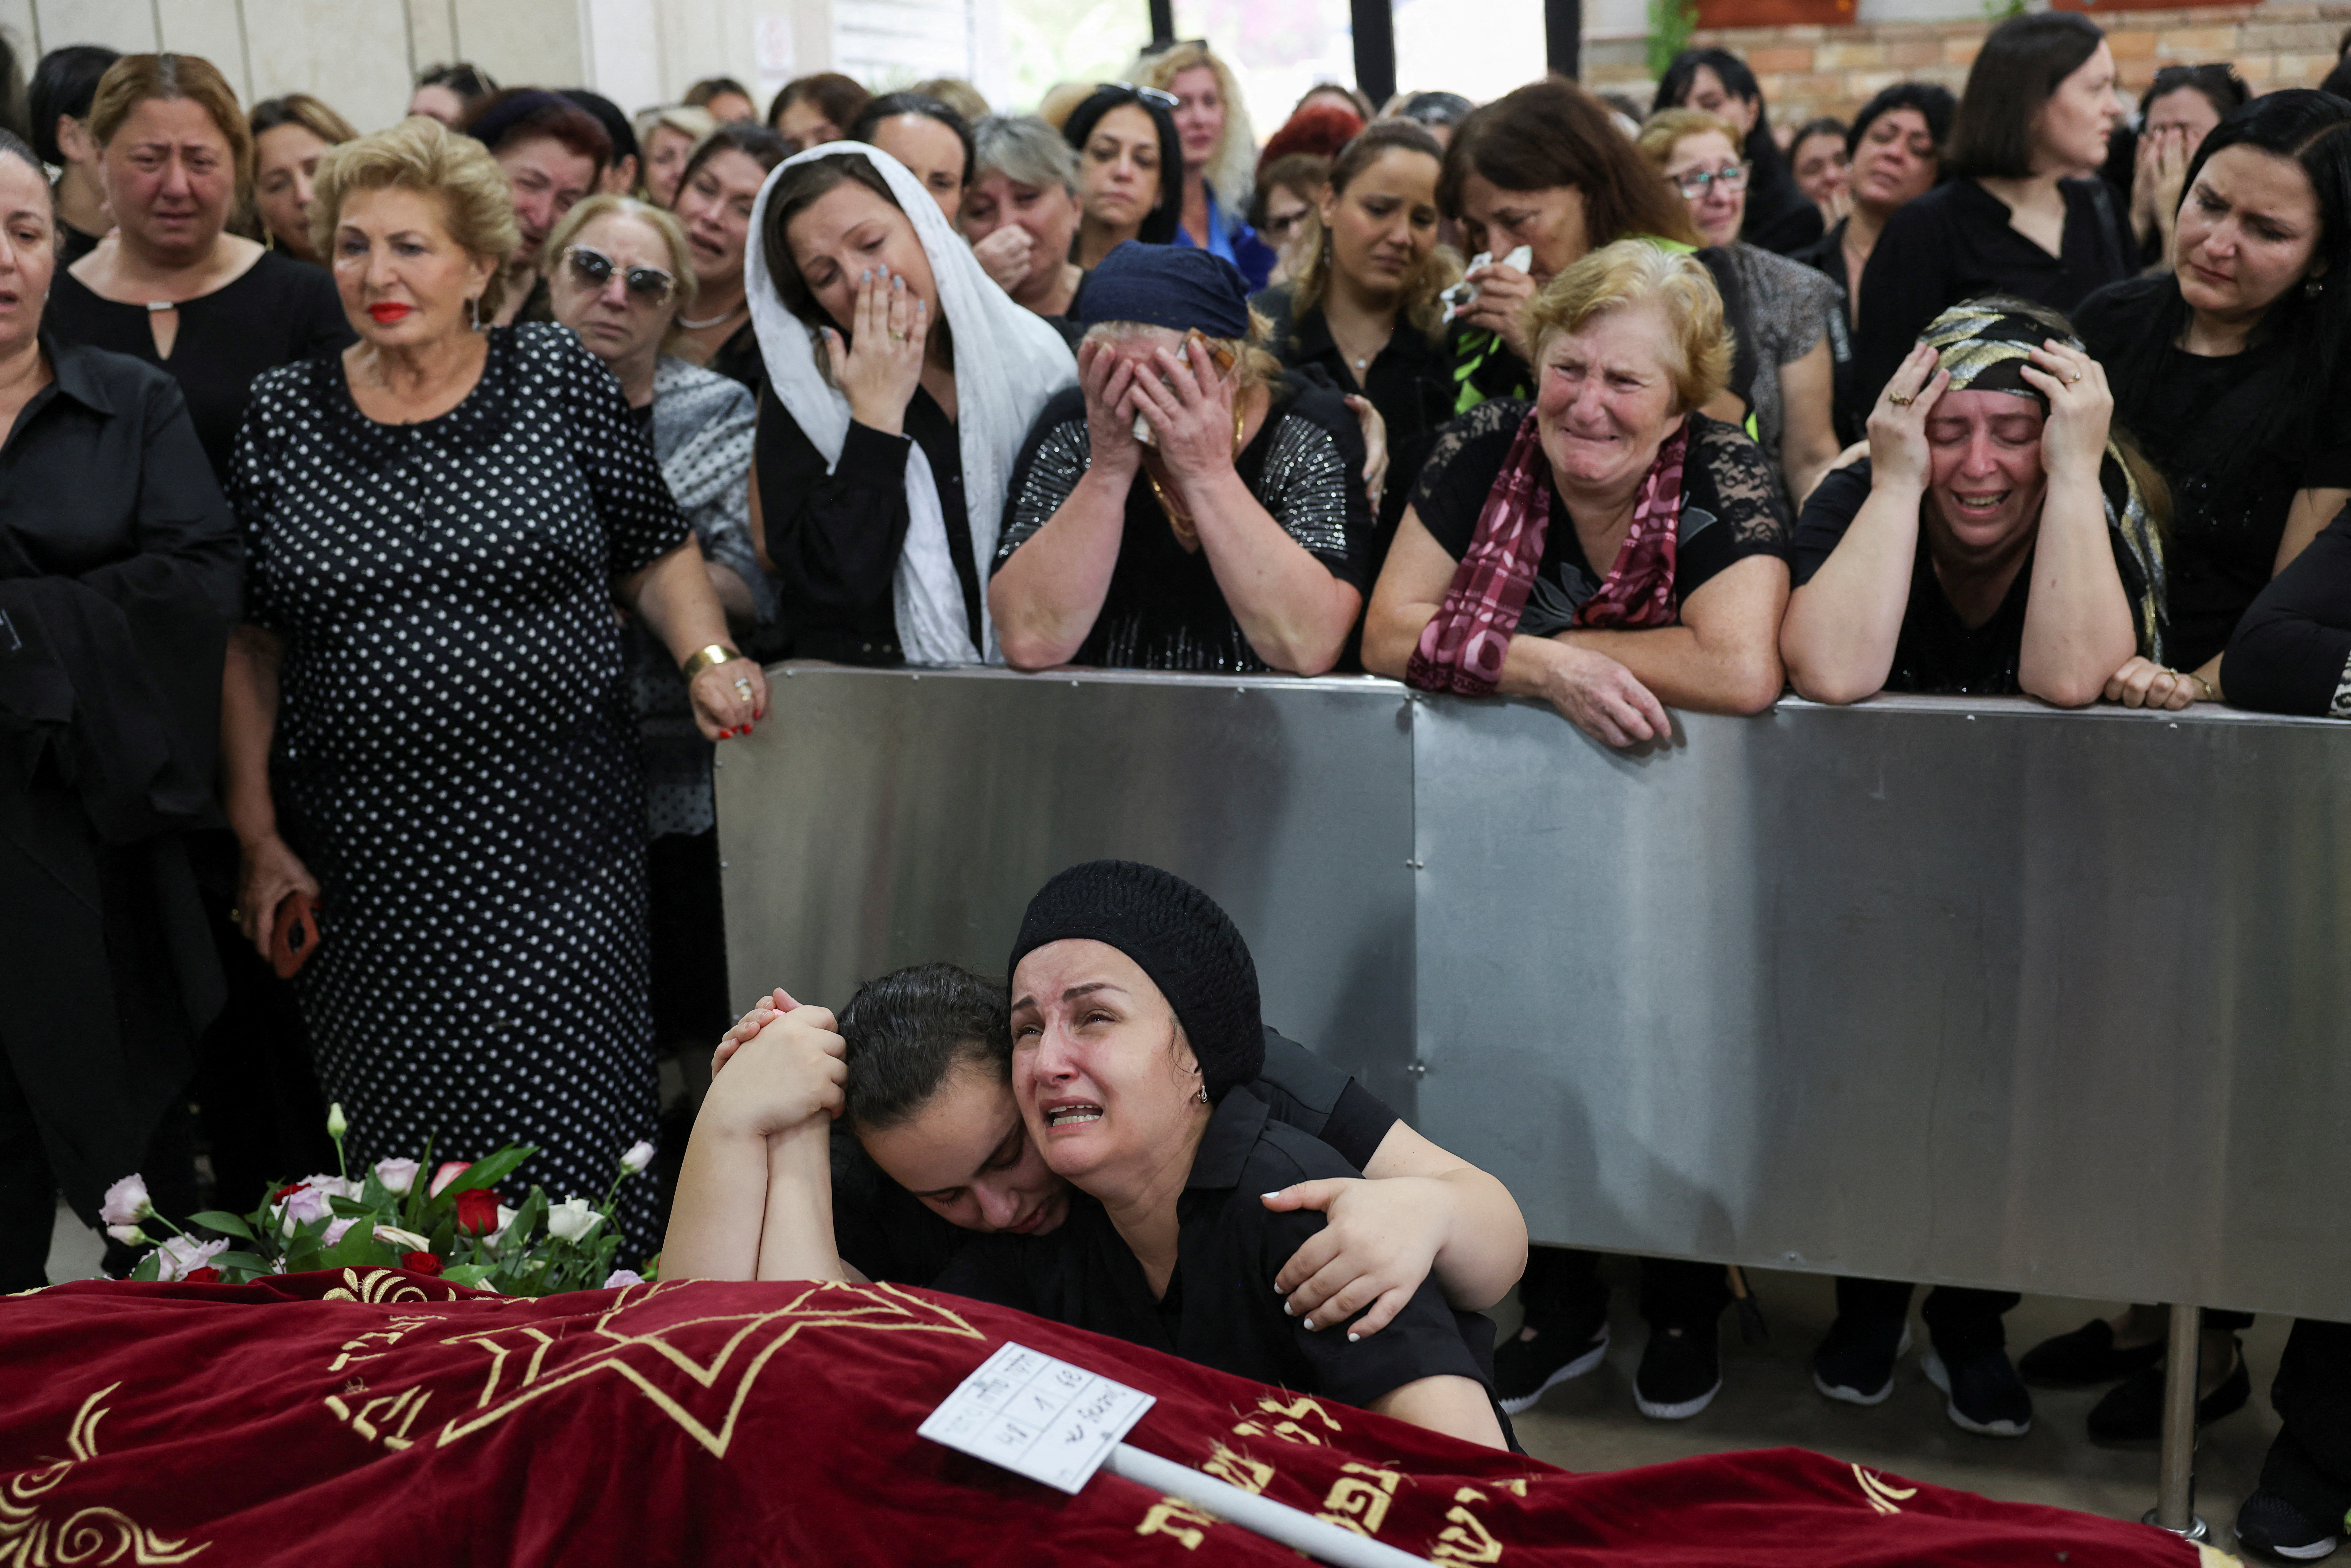 Funeral of 9-year-old Tamar Chaya Torpiashvili, who died following a cardiac attack while she was seeking shelter during a siren warning of incoming rockets being fired from the Gaza Strip into Israel, in Ashdod